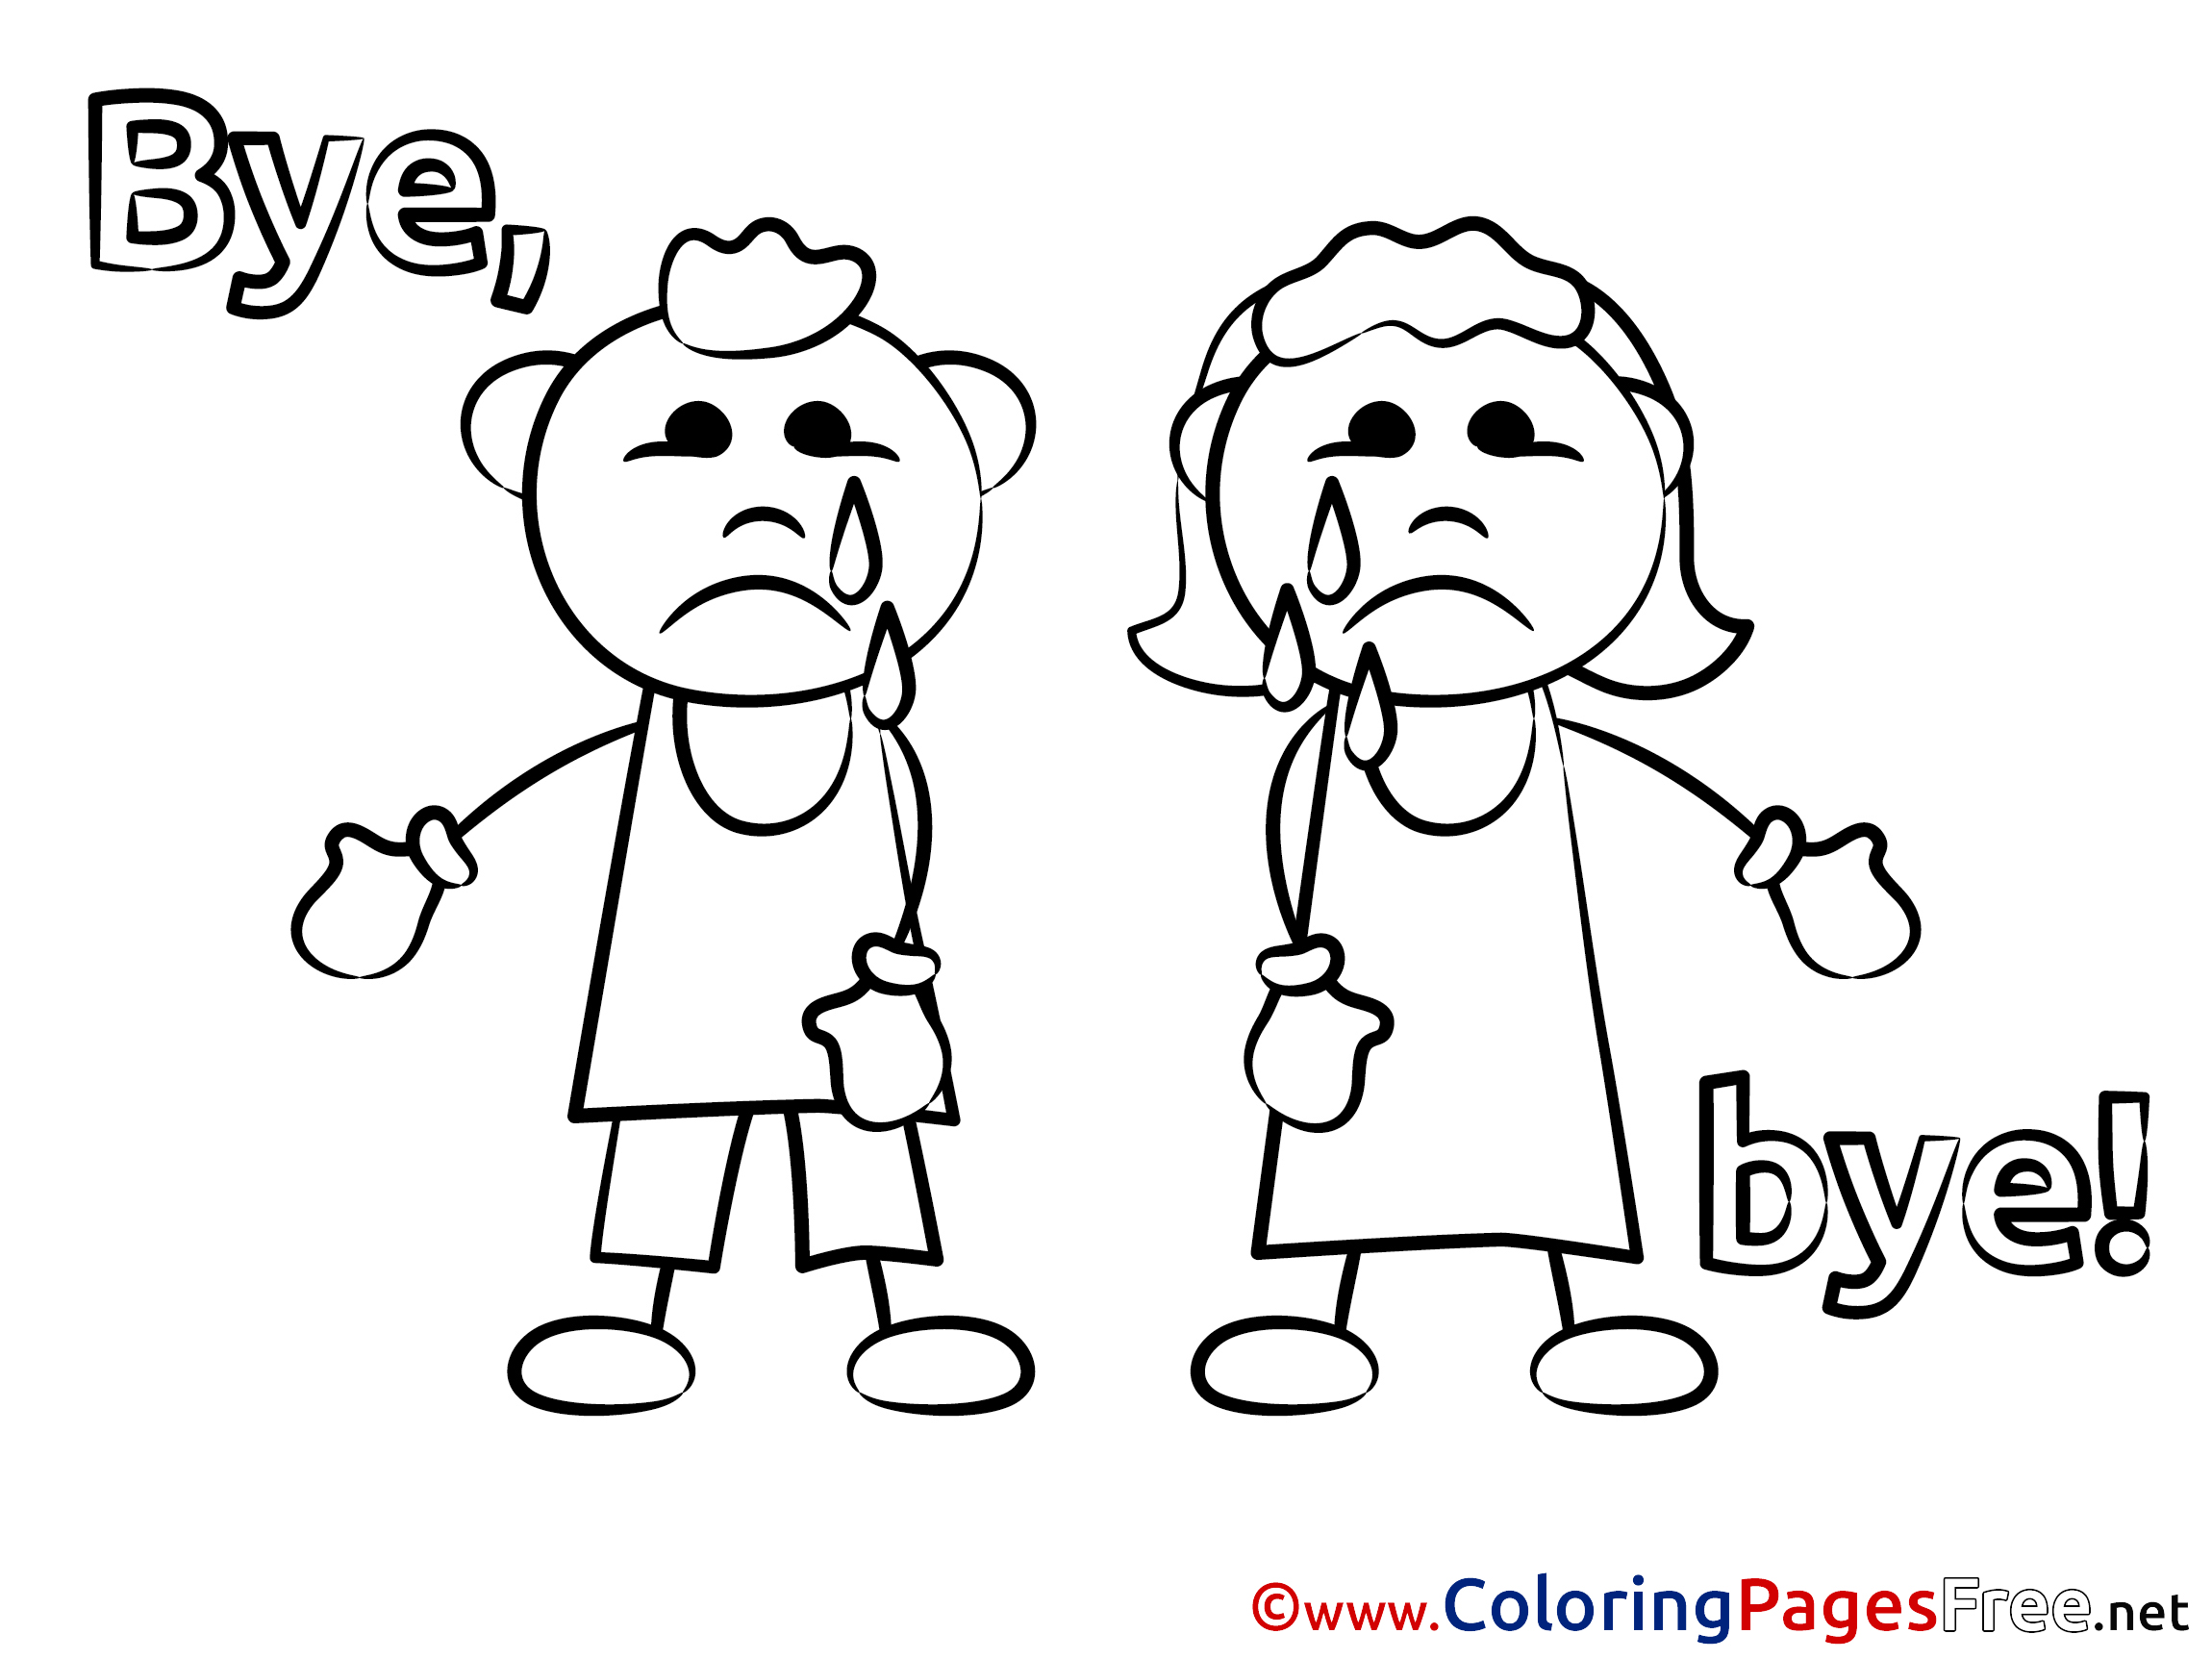 kids-free-colouring-page-good-bye